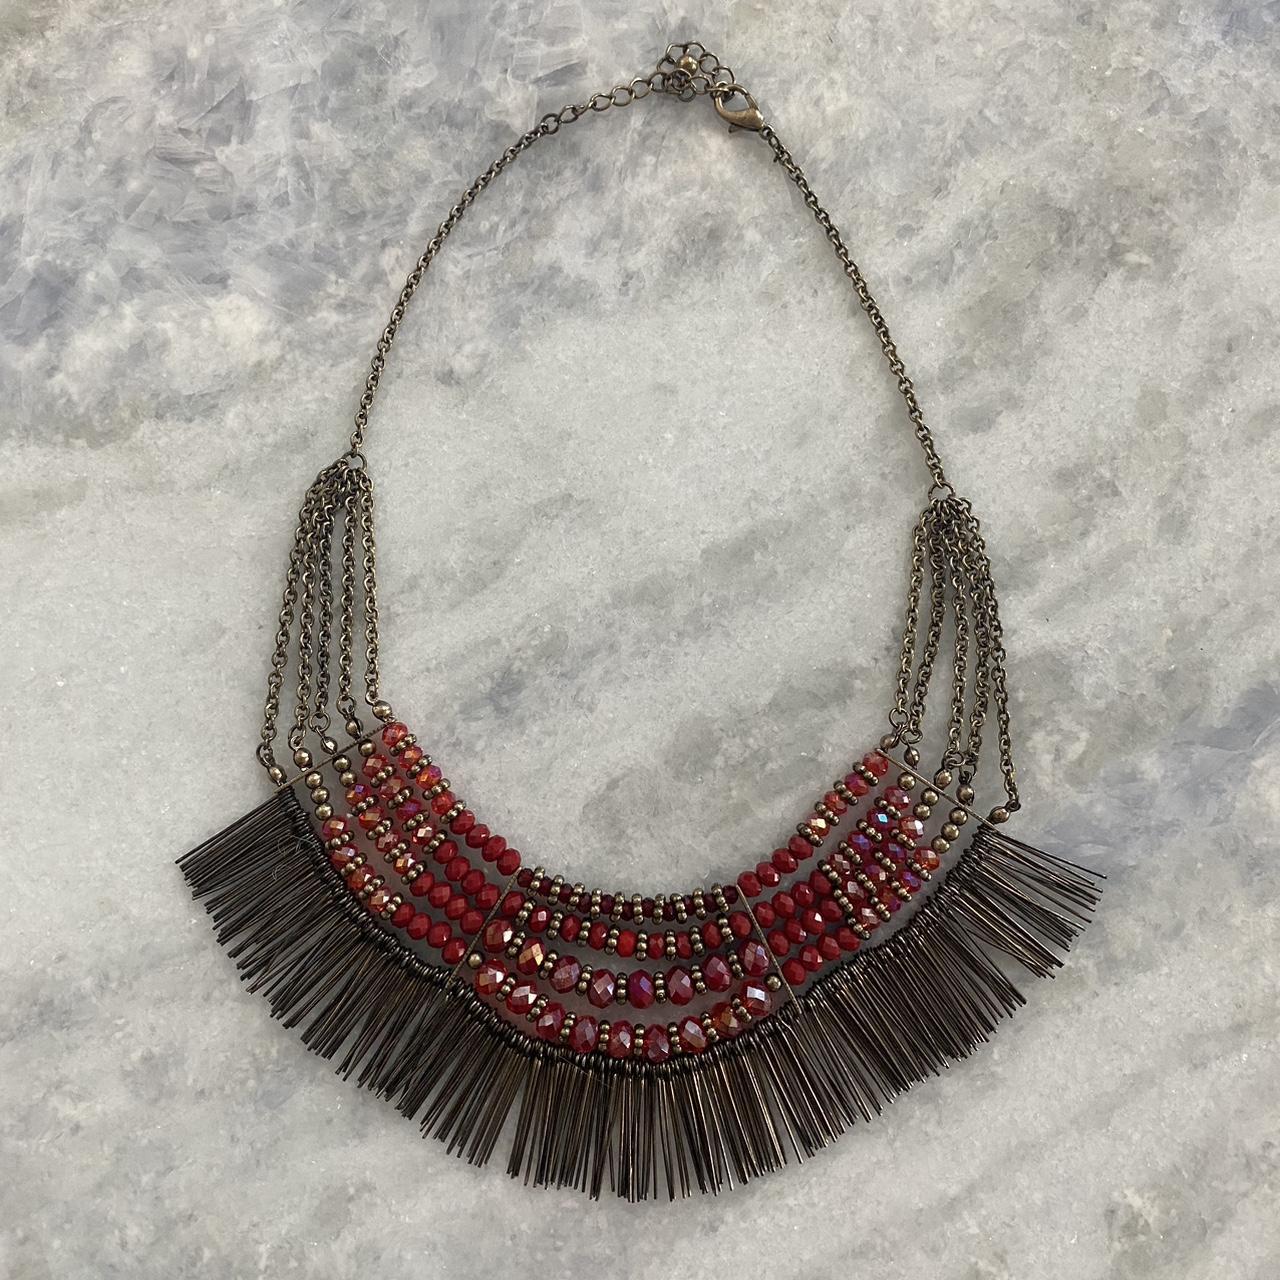 Burgundy statement necklace PAYPAL PURCHASES WILL... - Depop